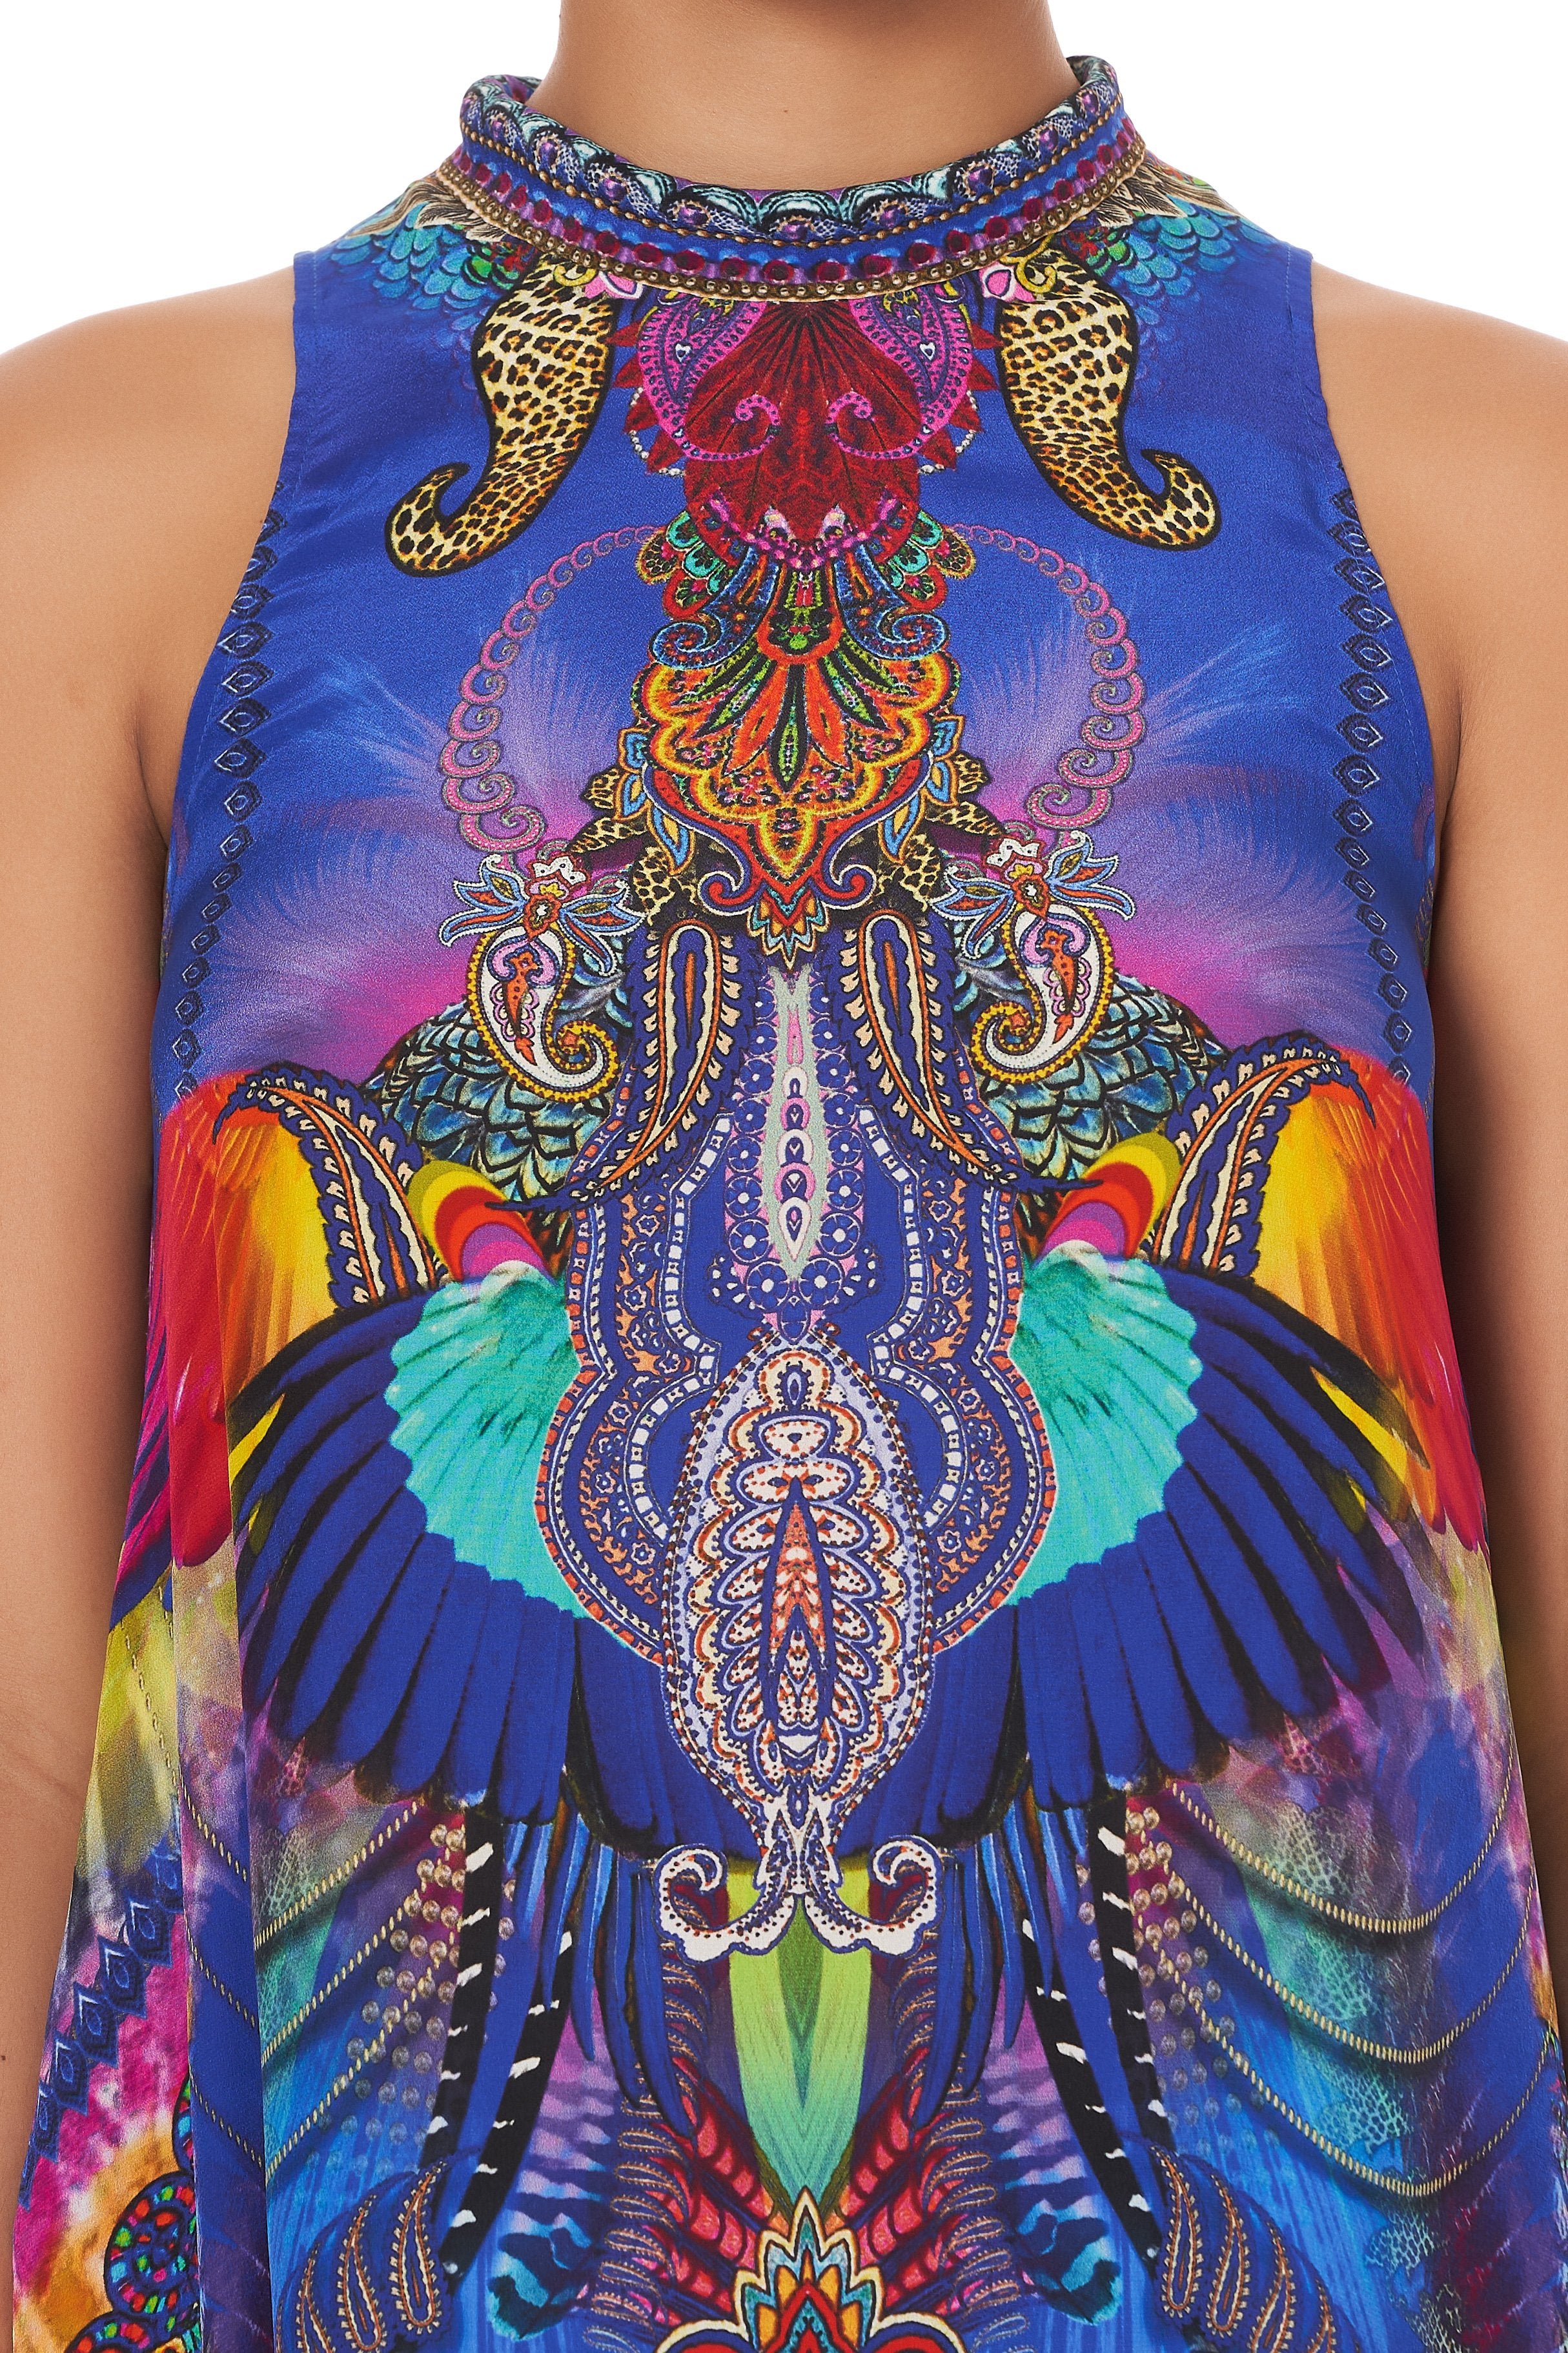 HIGH NECK DRESS WITH BACK NECK TIE PSYCHEDELICA